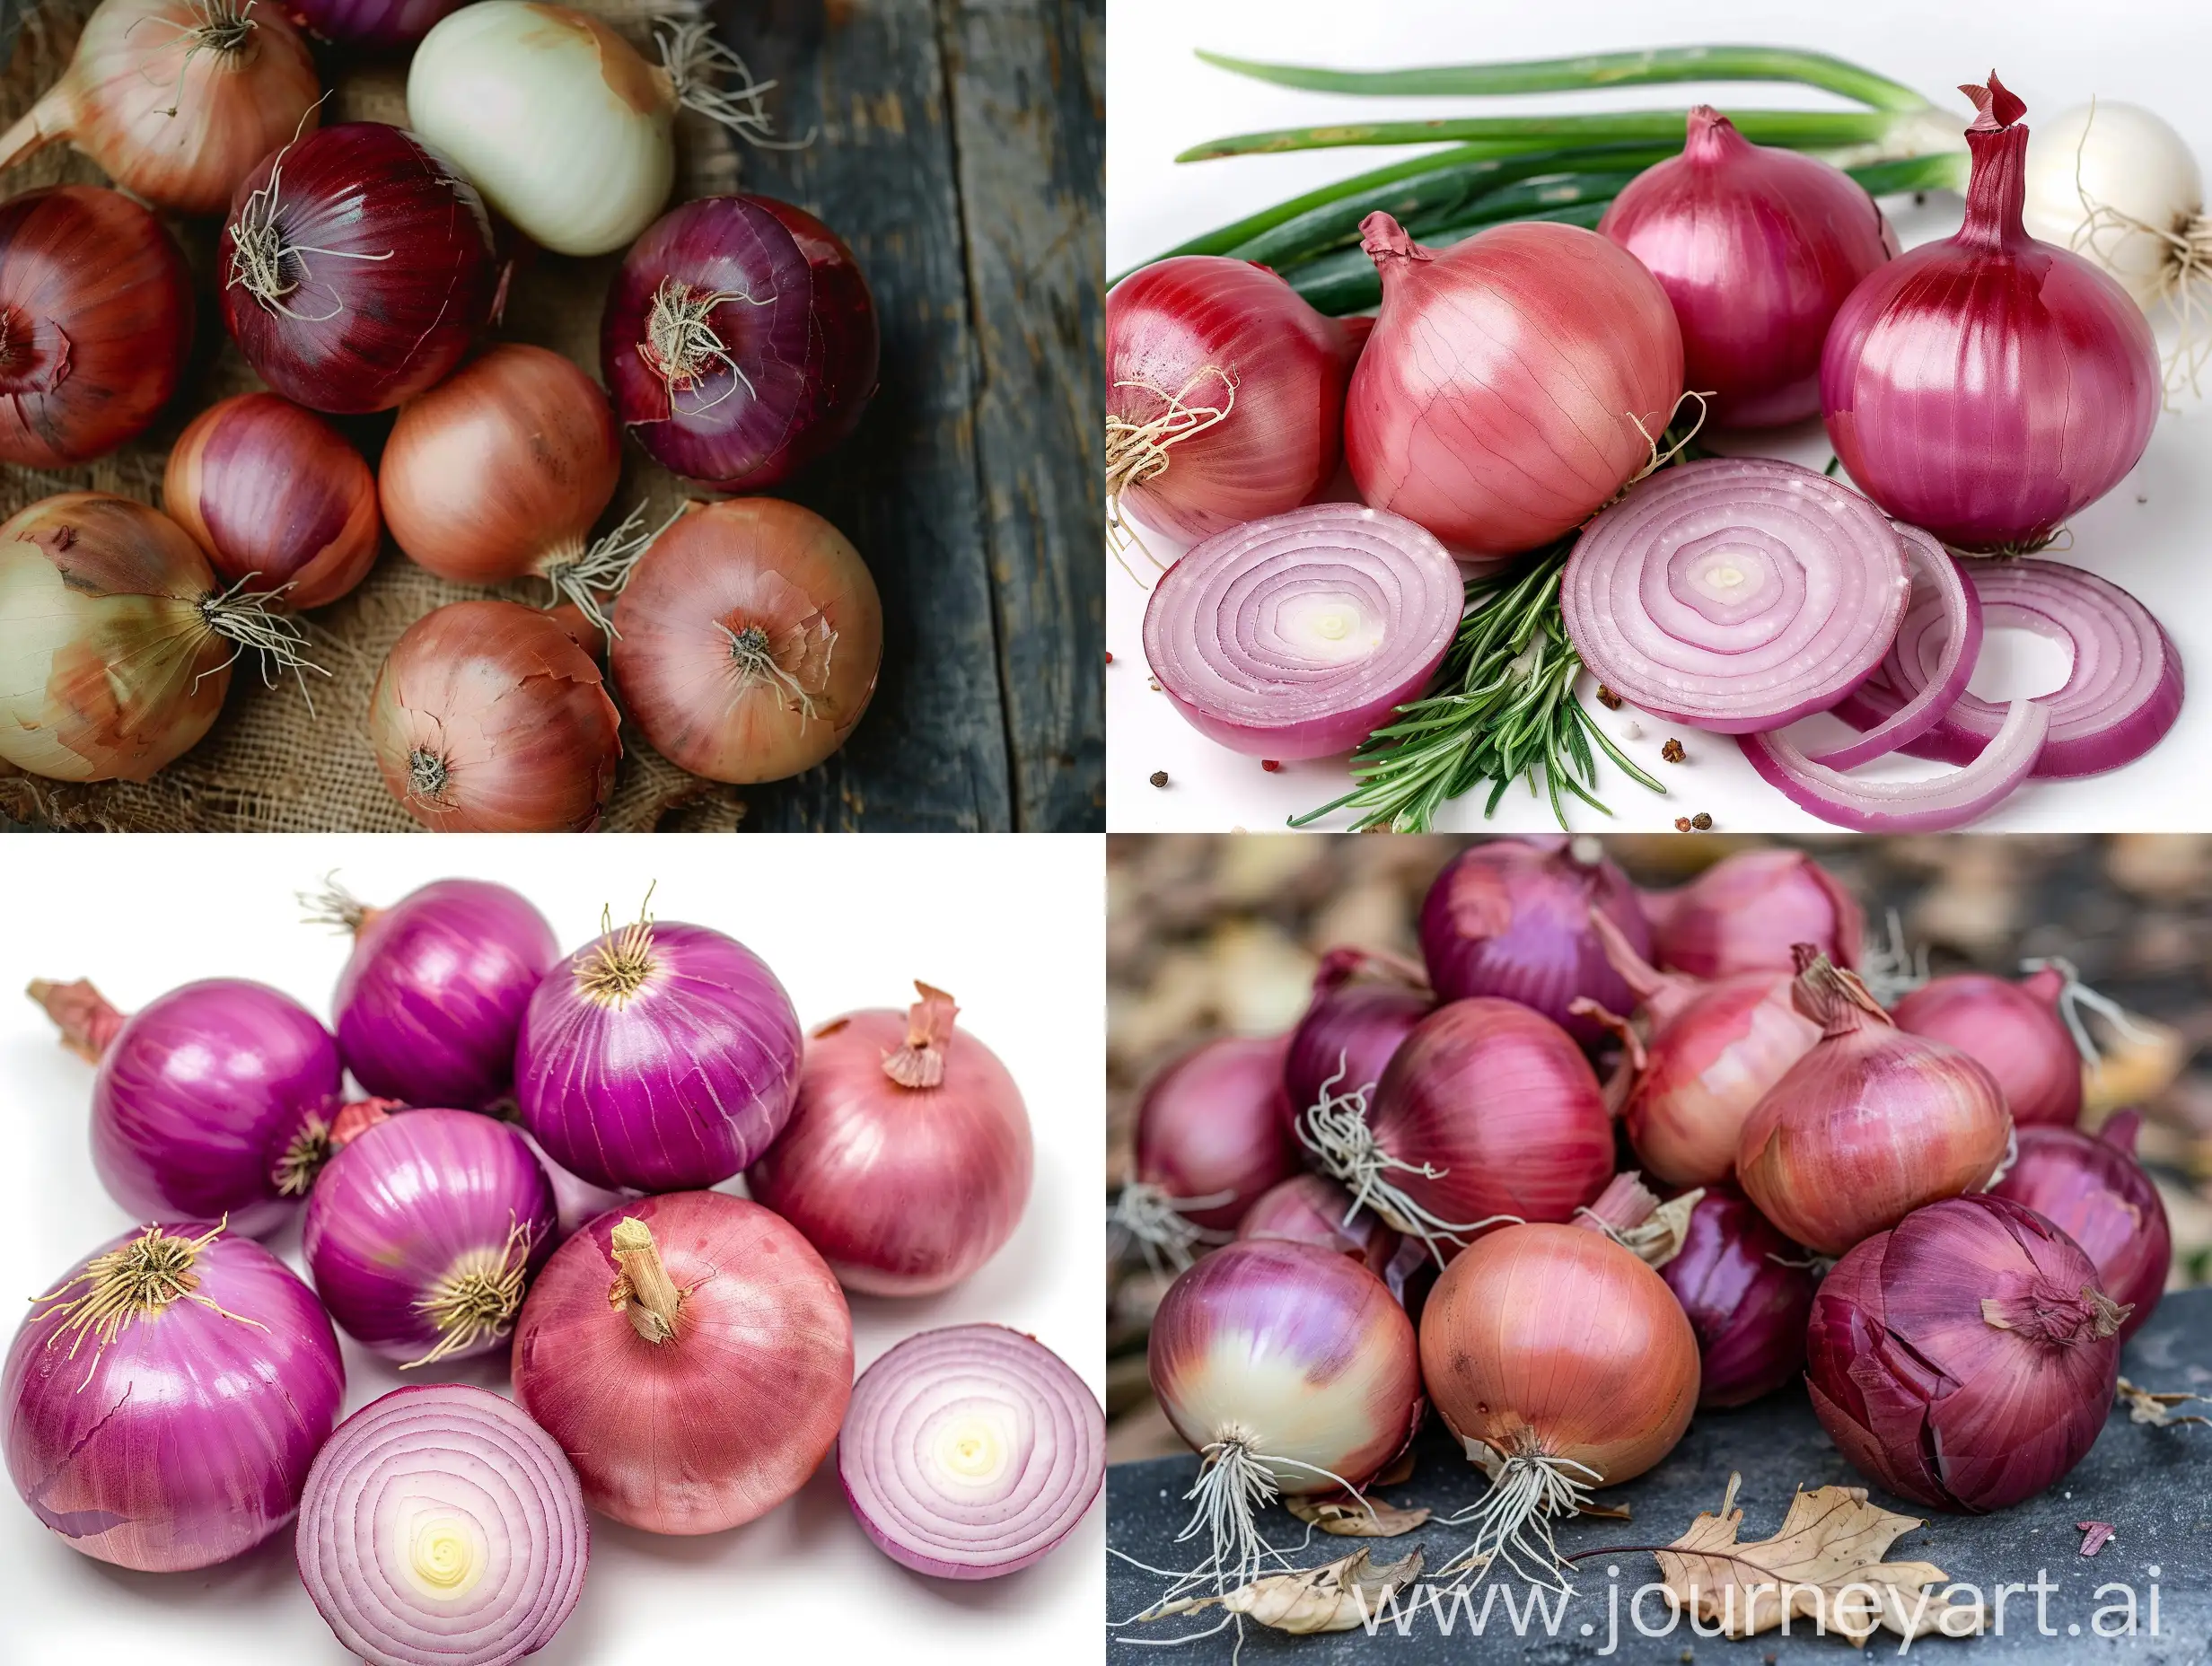 Real attractive advertising photo of onions